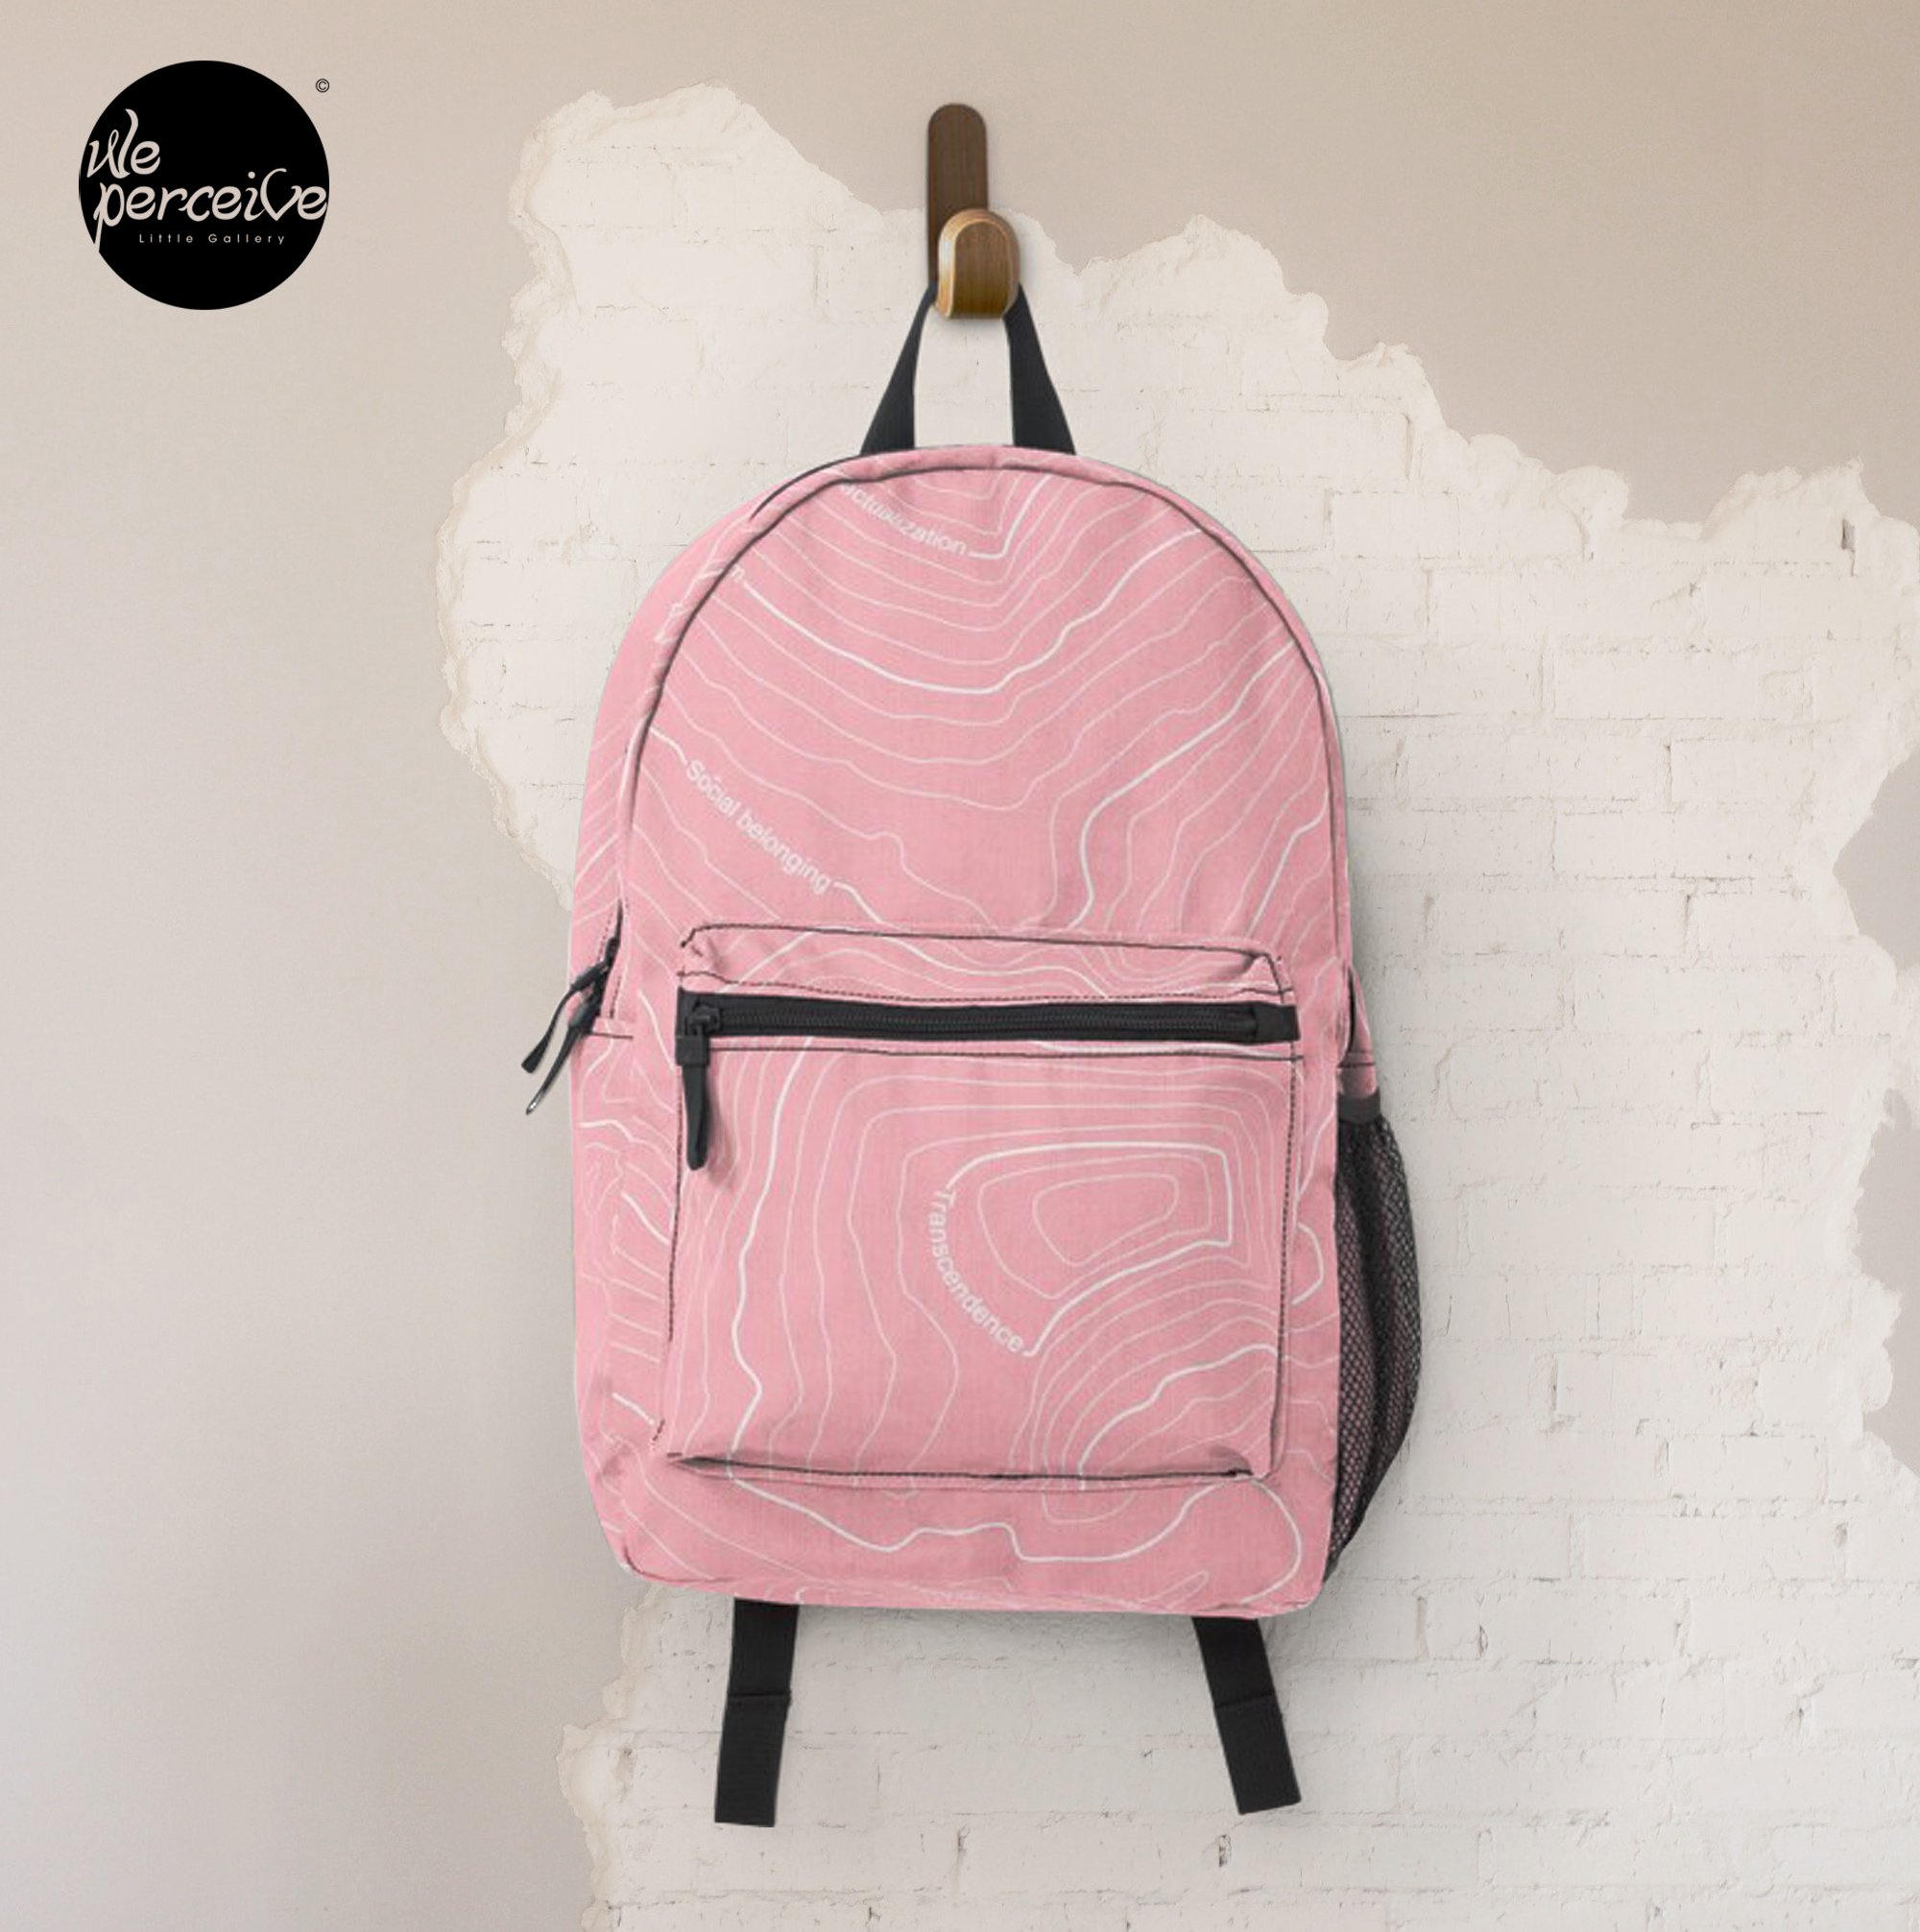 Maslow hierarchy of needs pink backpack.jpg